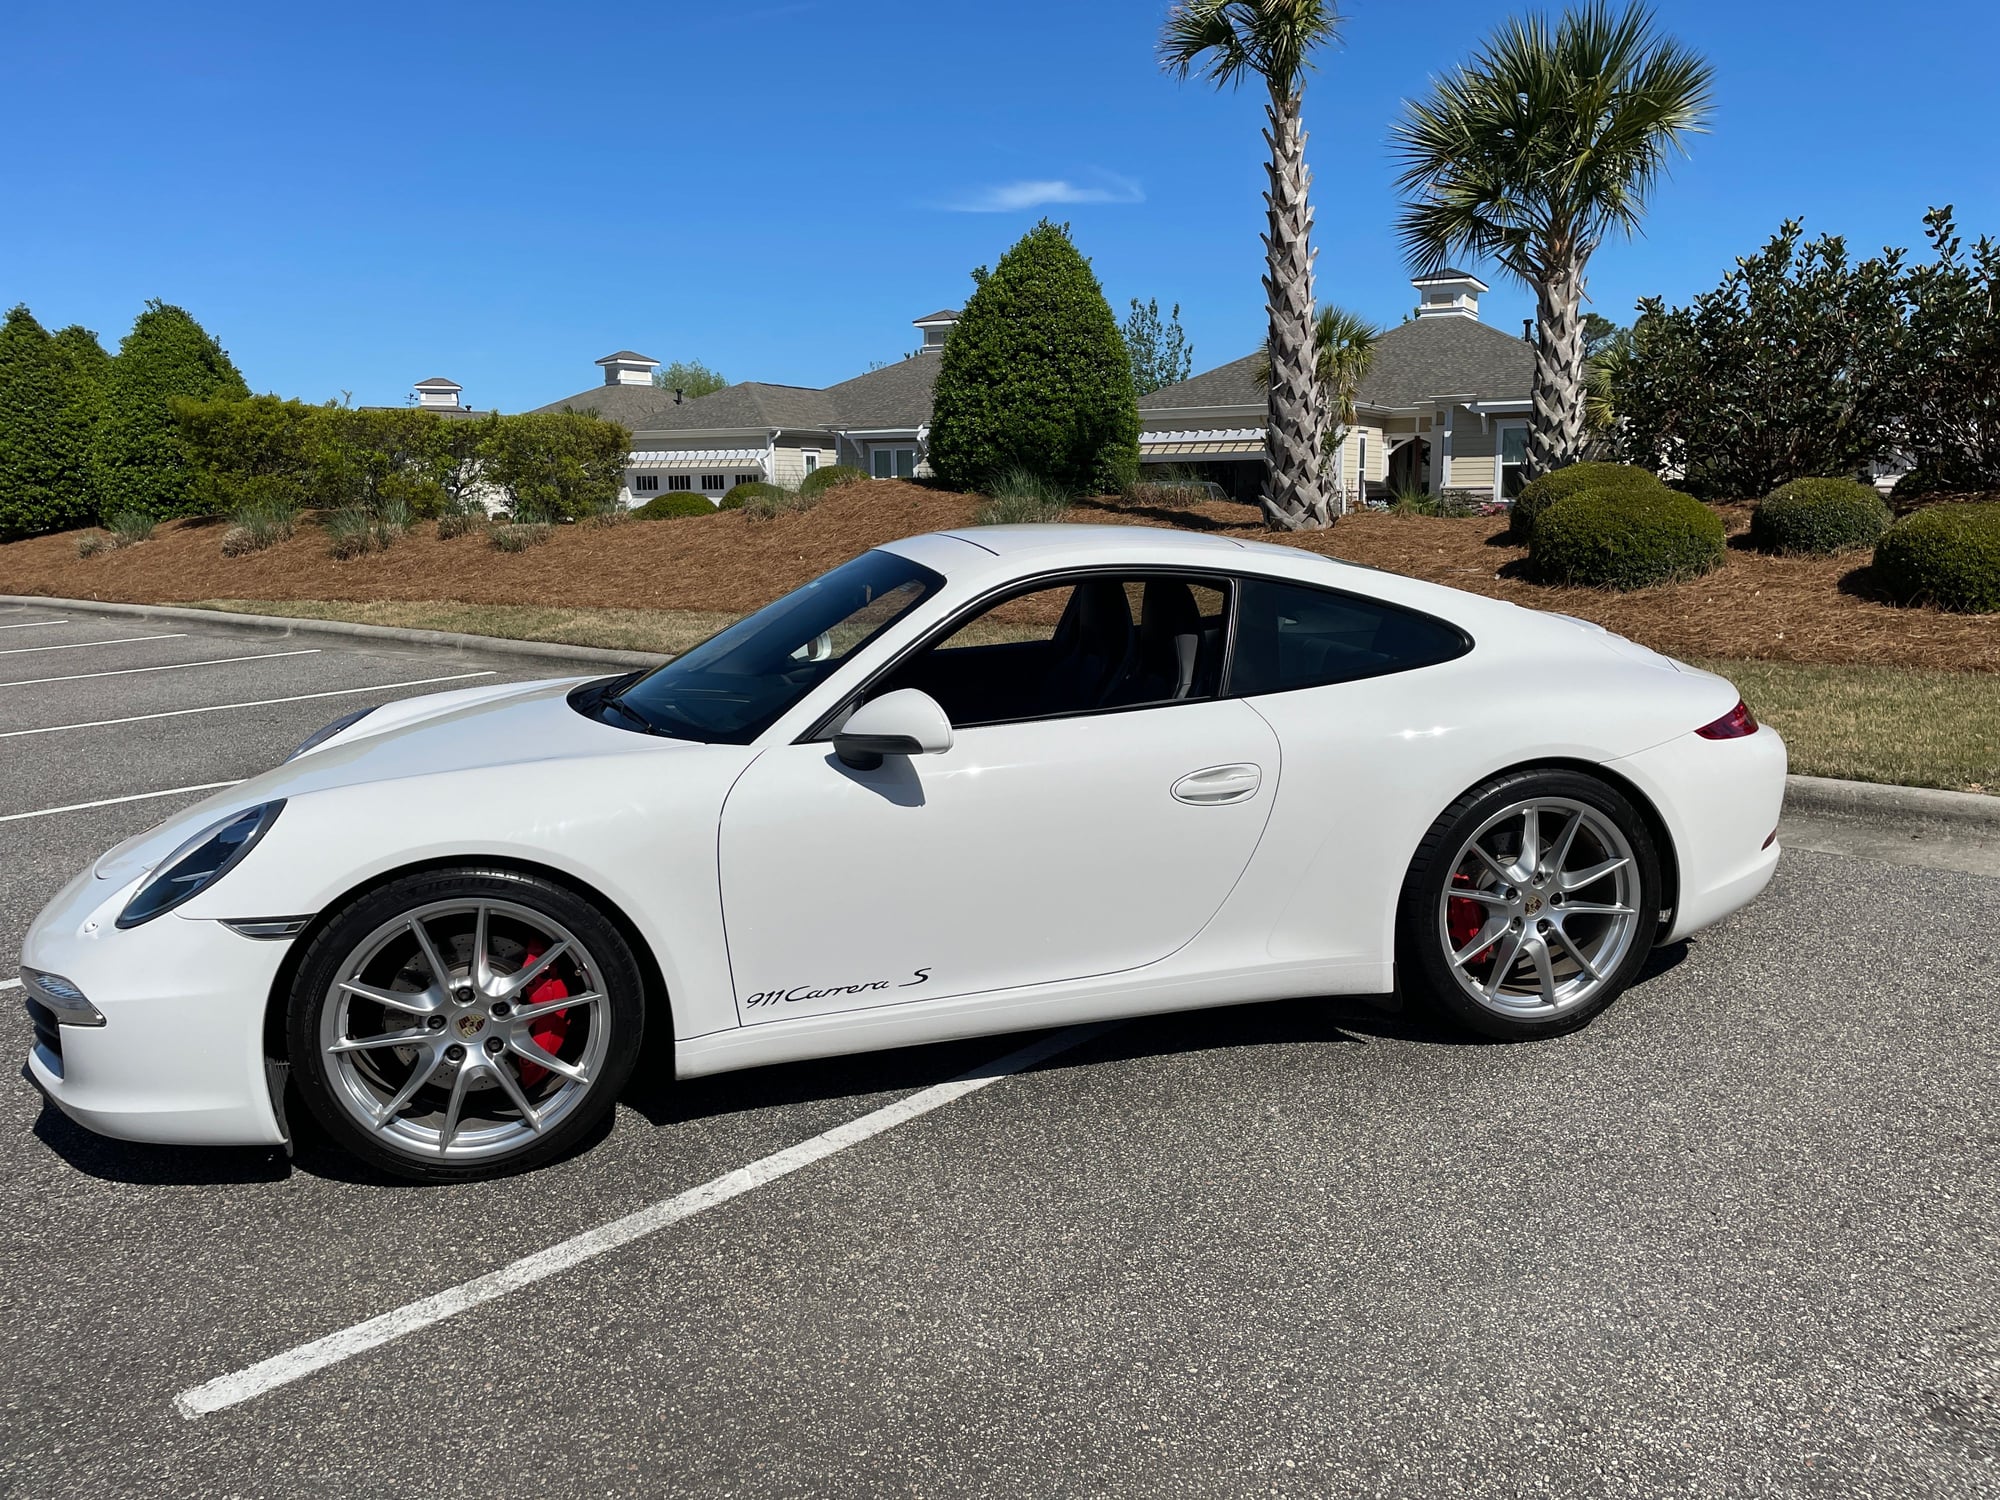 2012 Porsche 911 - 2012.5 991S, PDK, Adaptive Sport Seats, Carrara White Coupe- NC - Used - VIN WP0AB2A91CS122303 - 41,450 Miles - 6 cyl - 2WD - Automatic - Coupe - White - Wilmington, NC 28451, United States